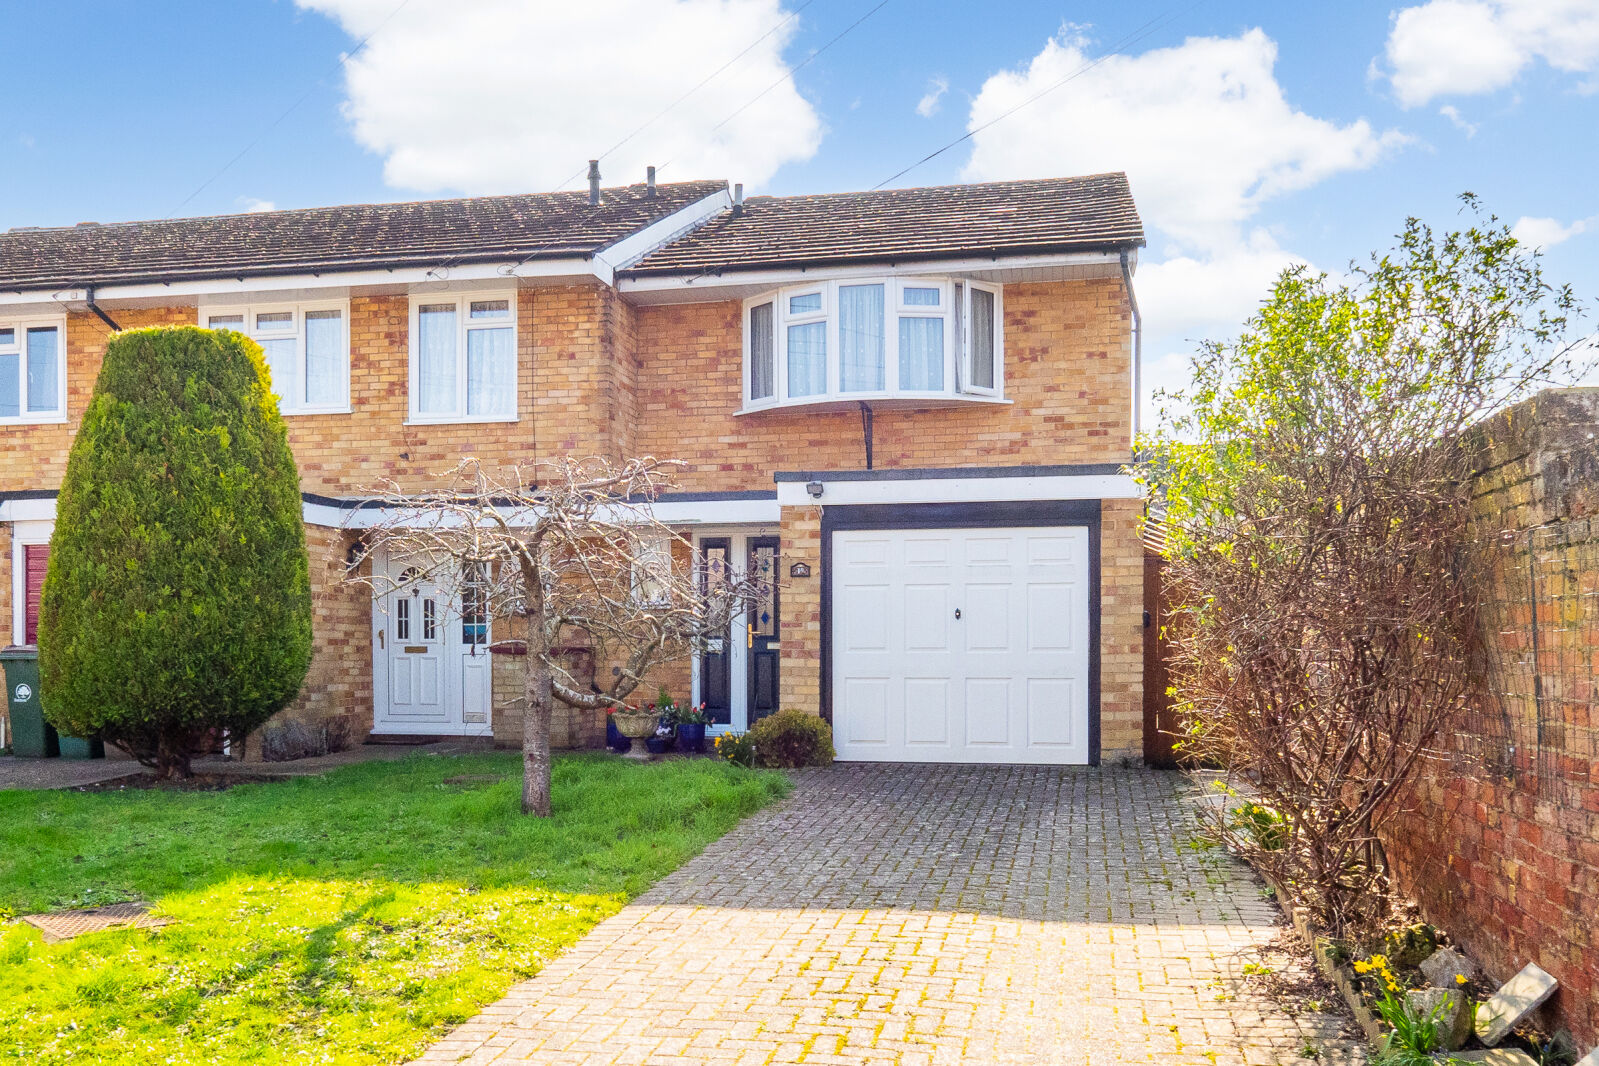 3 bedroom end terraced house for sale Hilldale Road, Cheam, SM1, main image